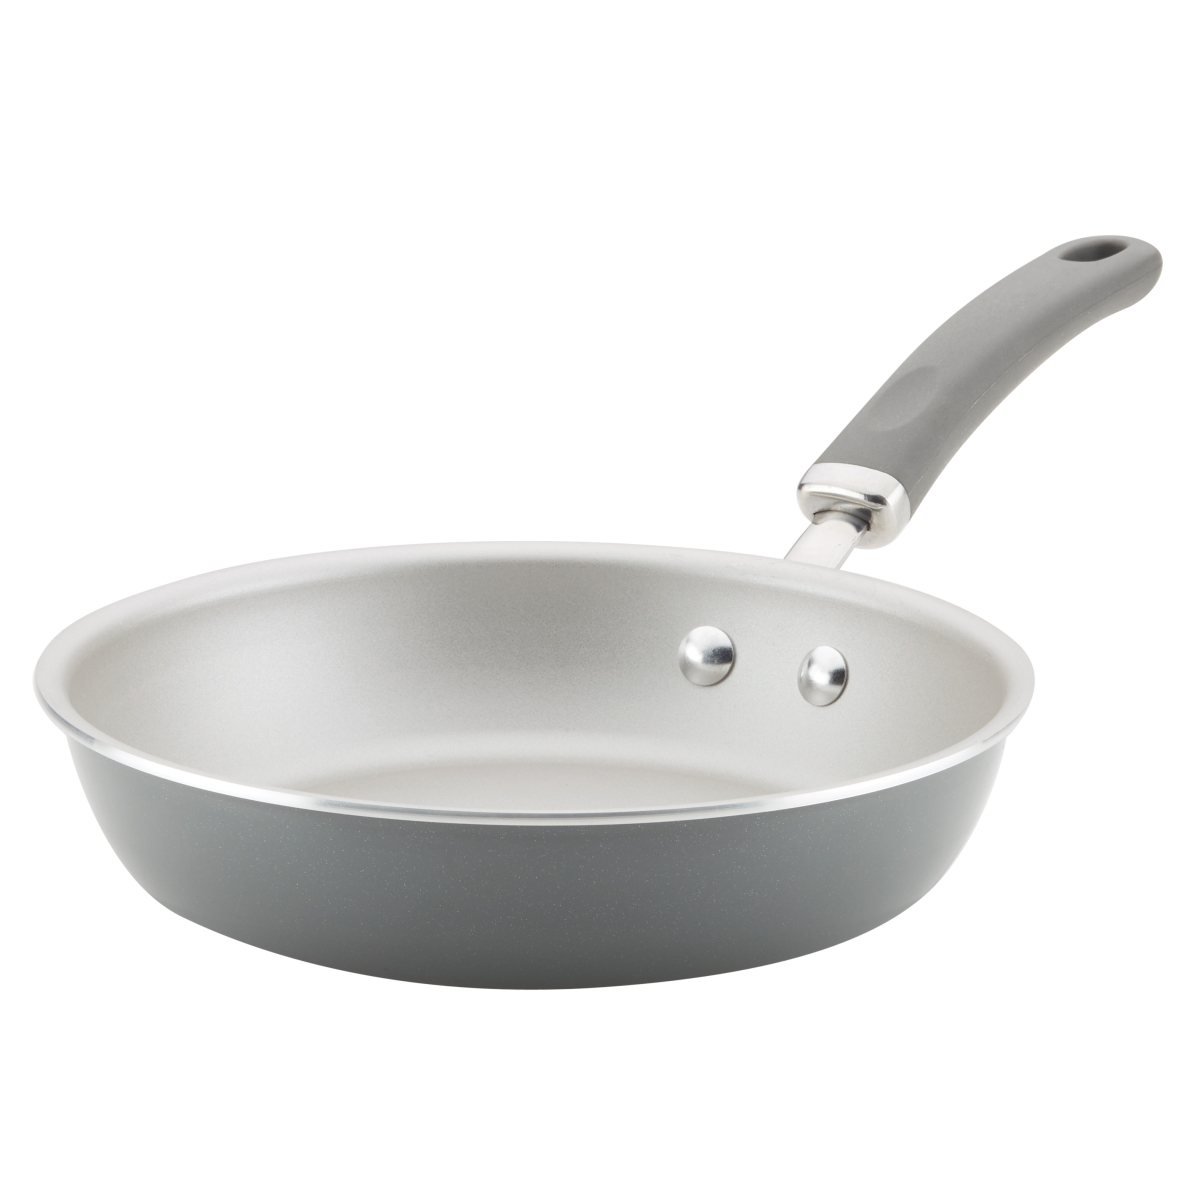 12004 Create Delicious Aluminum Nonstick Deep Skillet, 9.5 In. - Gray Shimmer